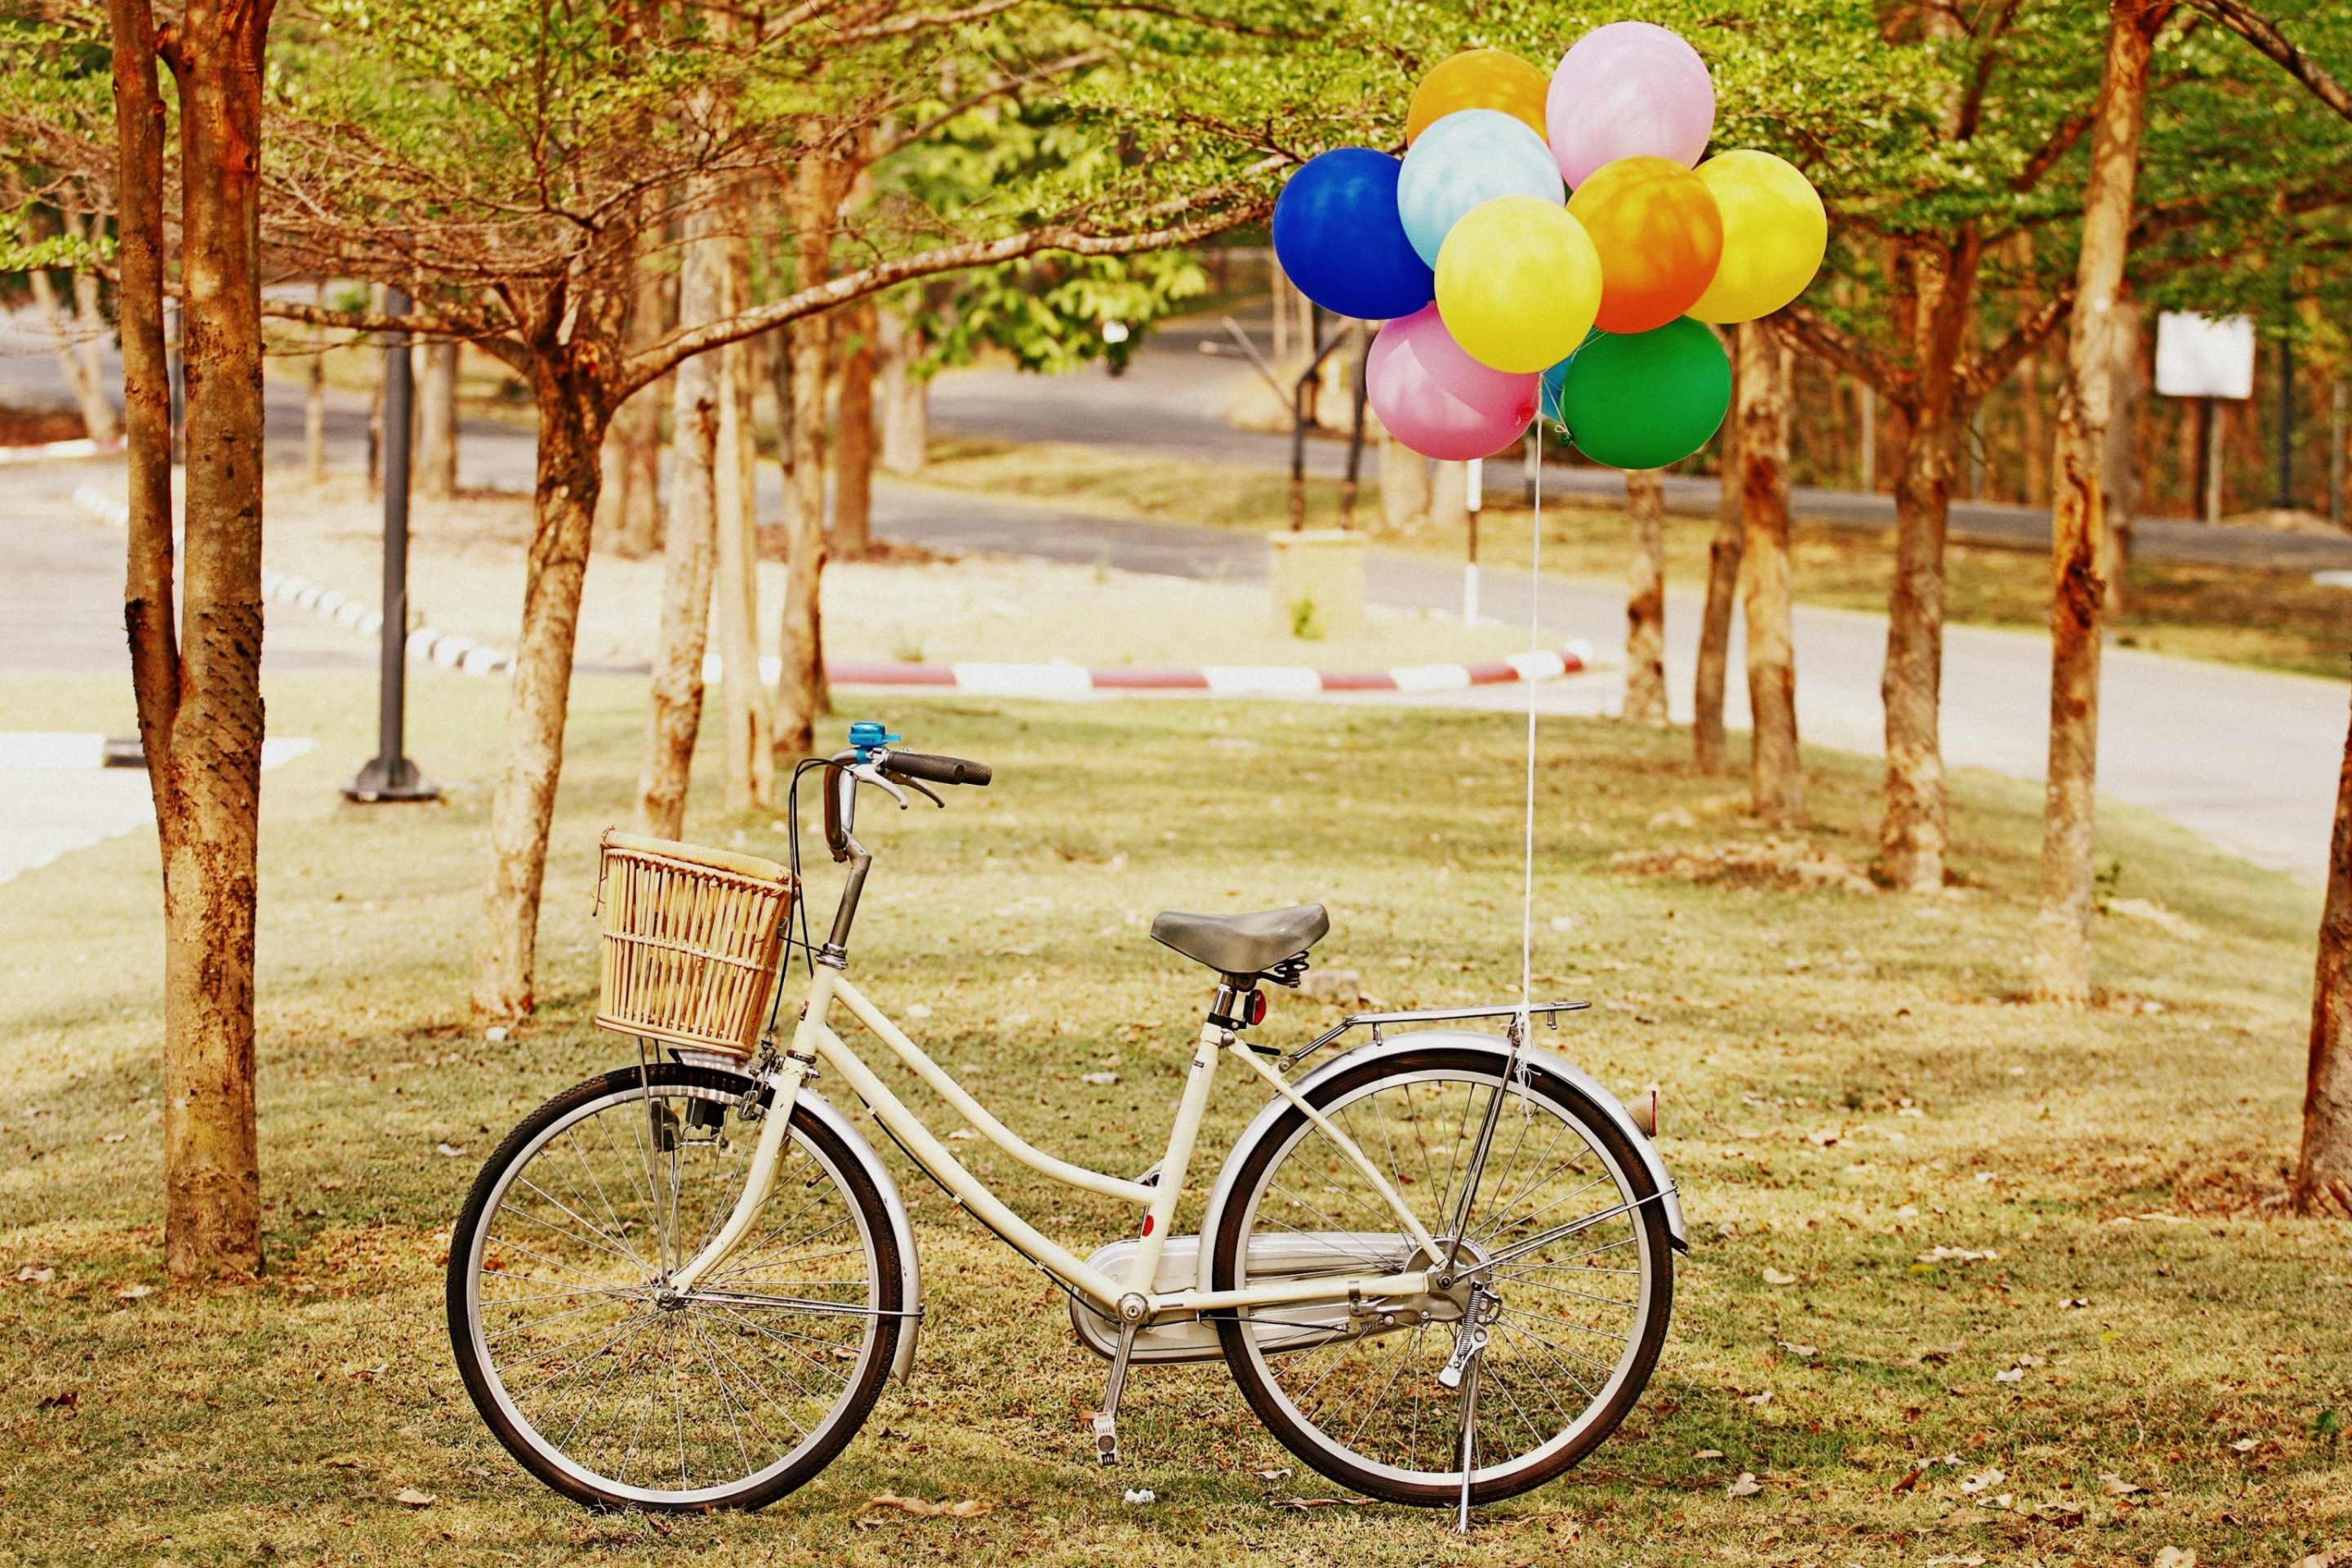 Party Bicycle wallpaper 2880x1920